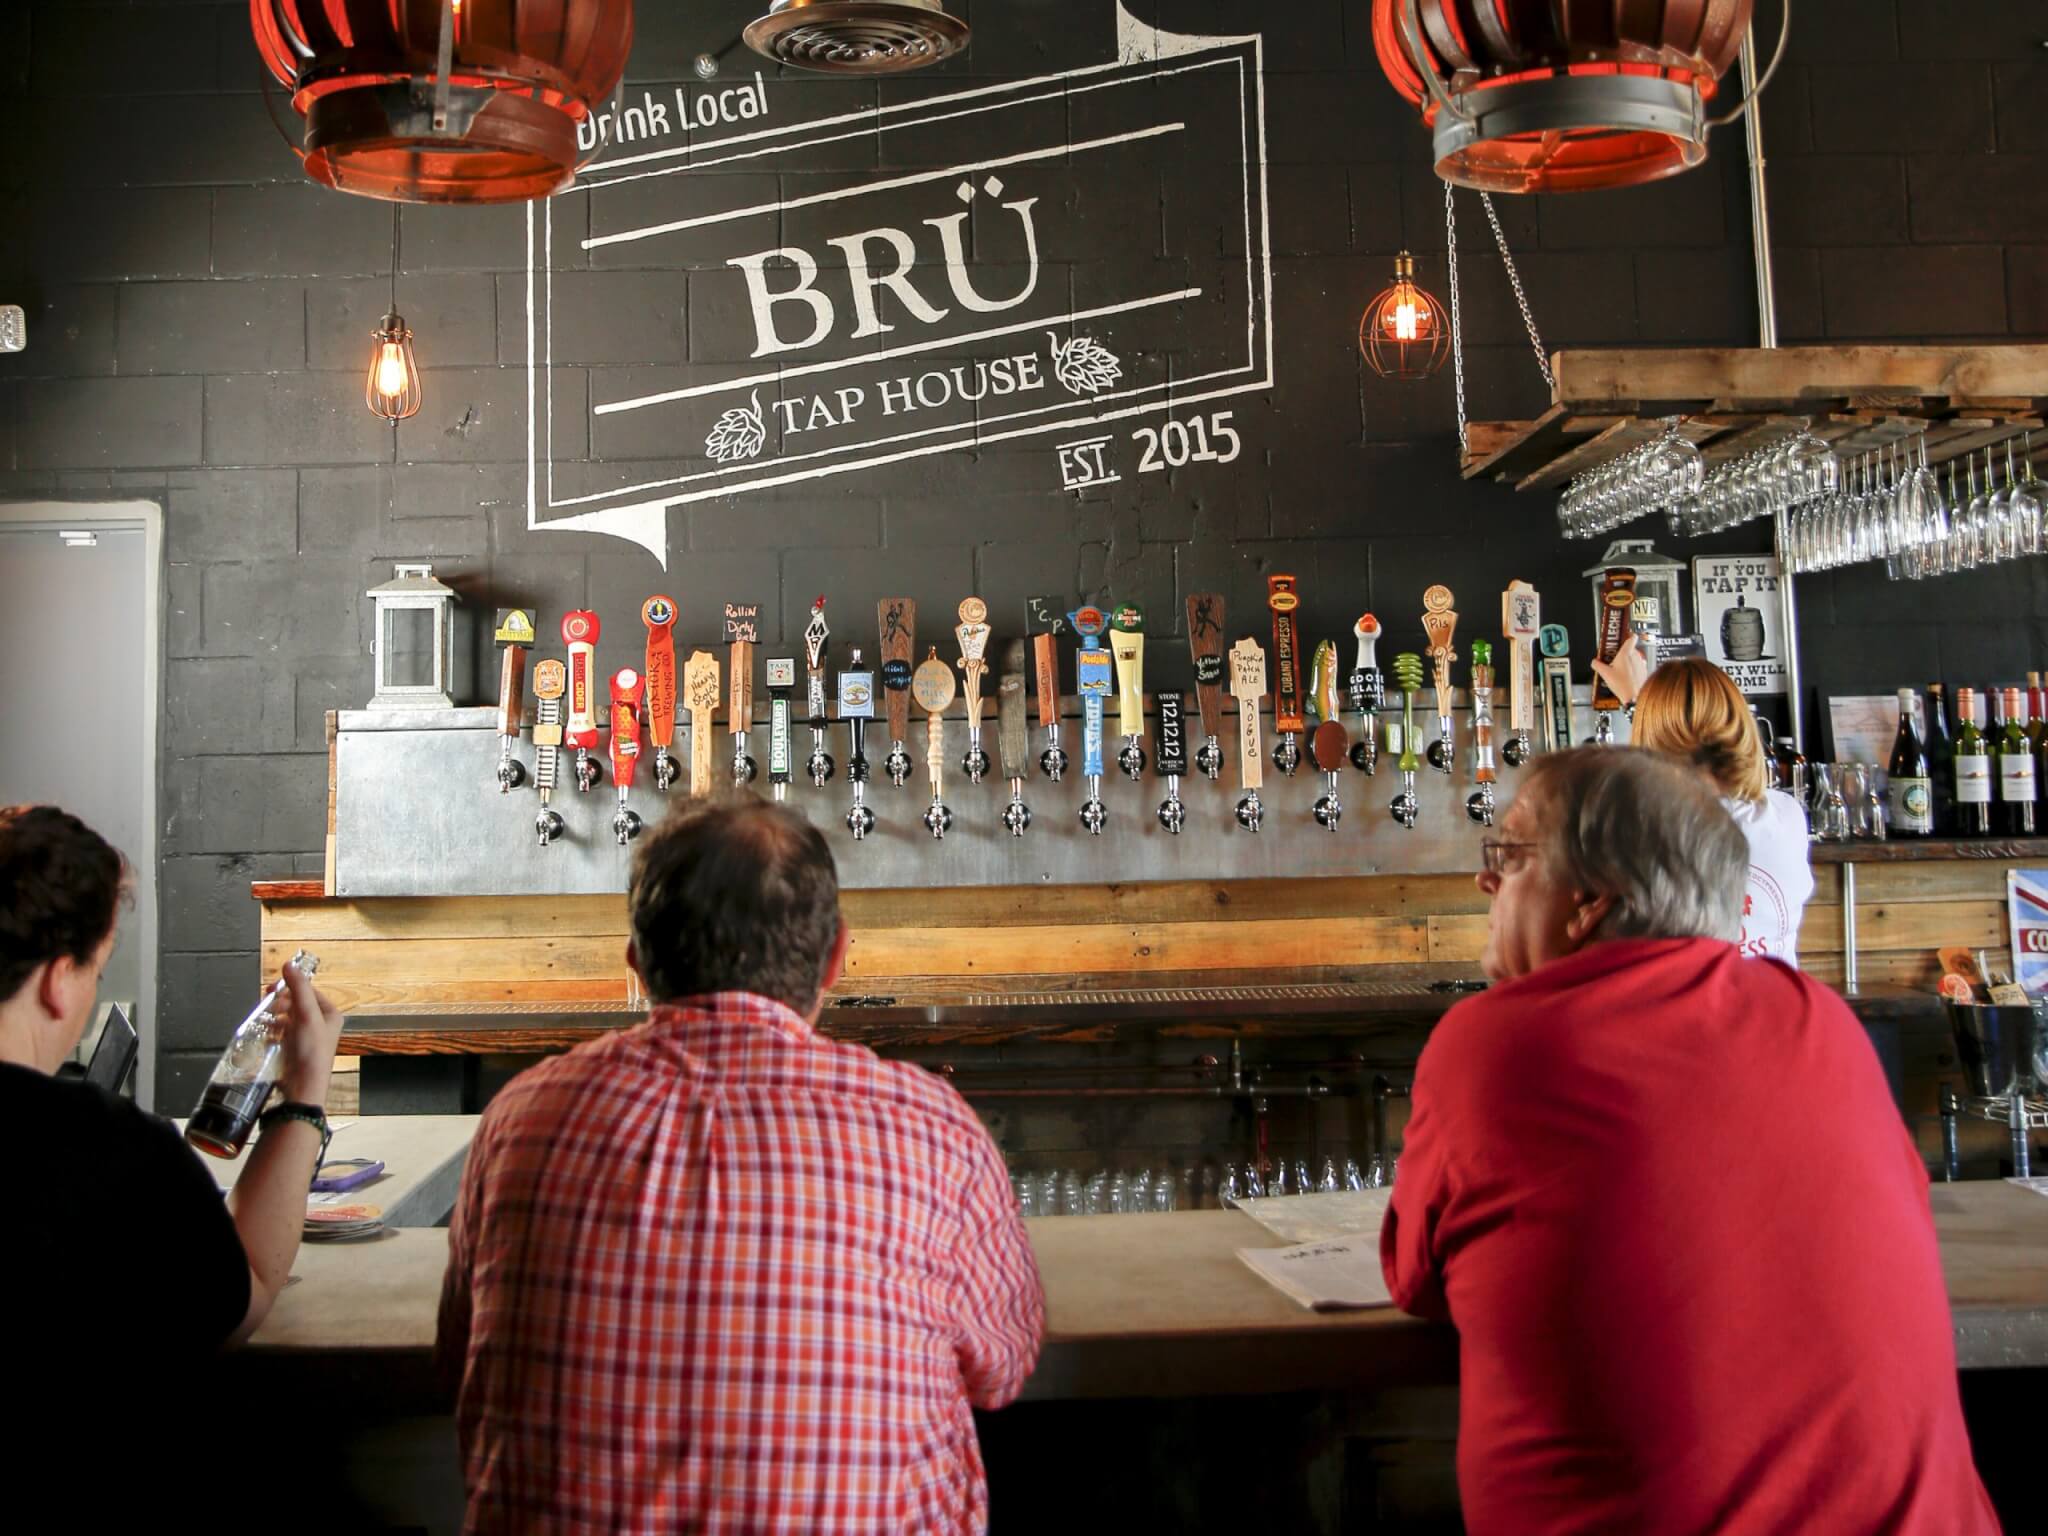 Interior, Bru Tap House, Tavares. Three people are sitting at the bar.